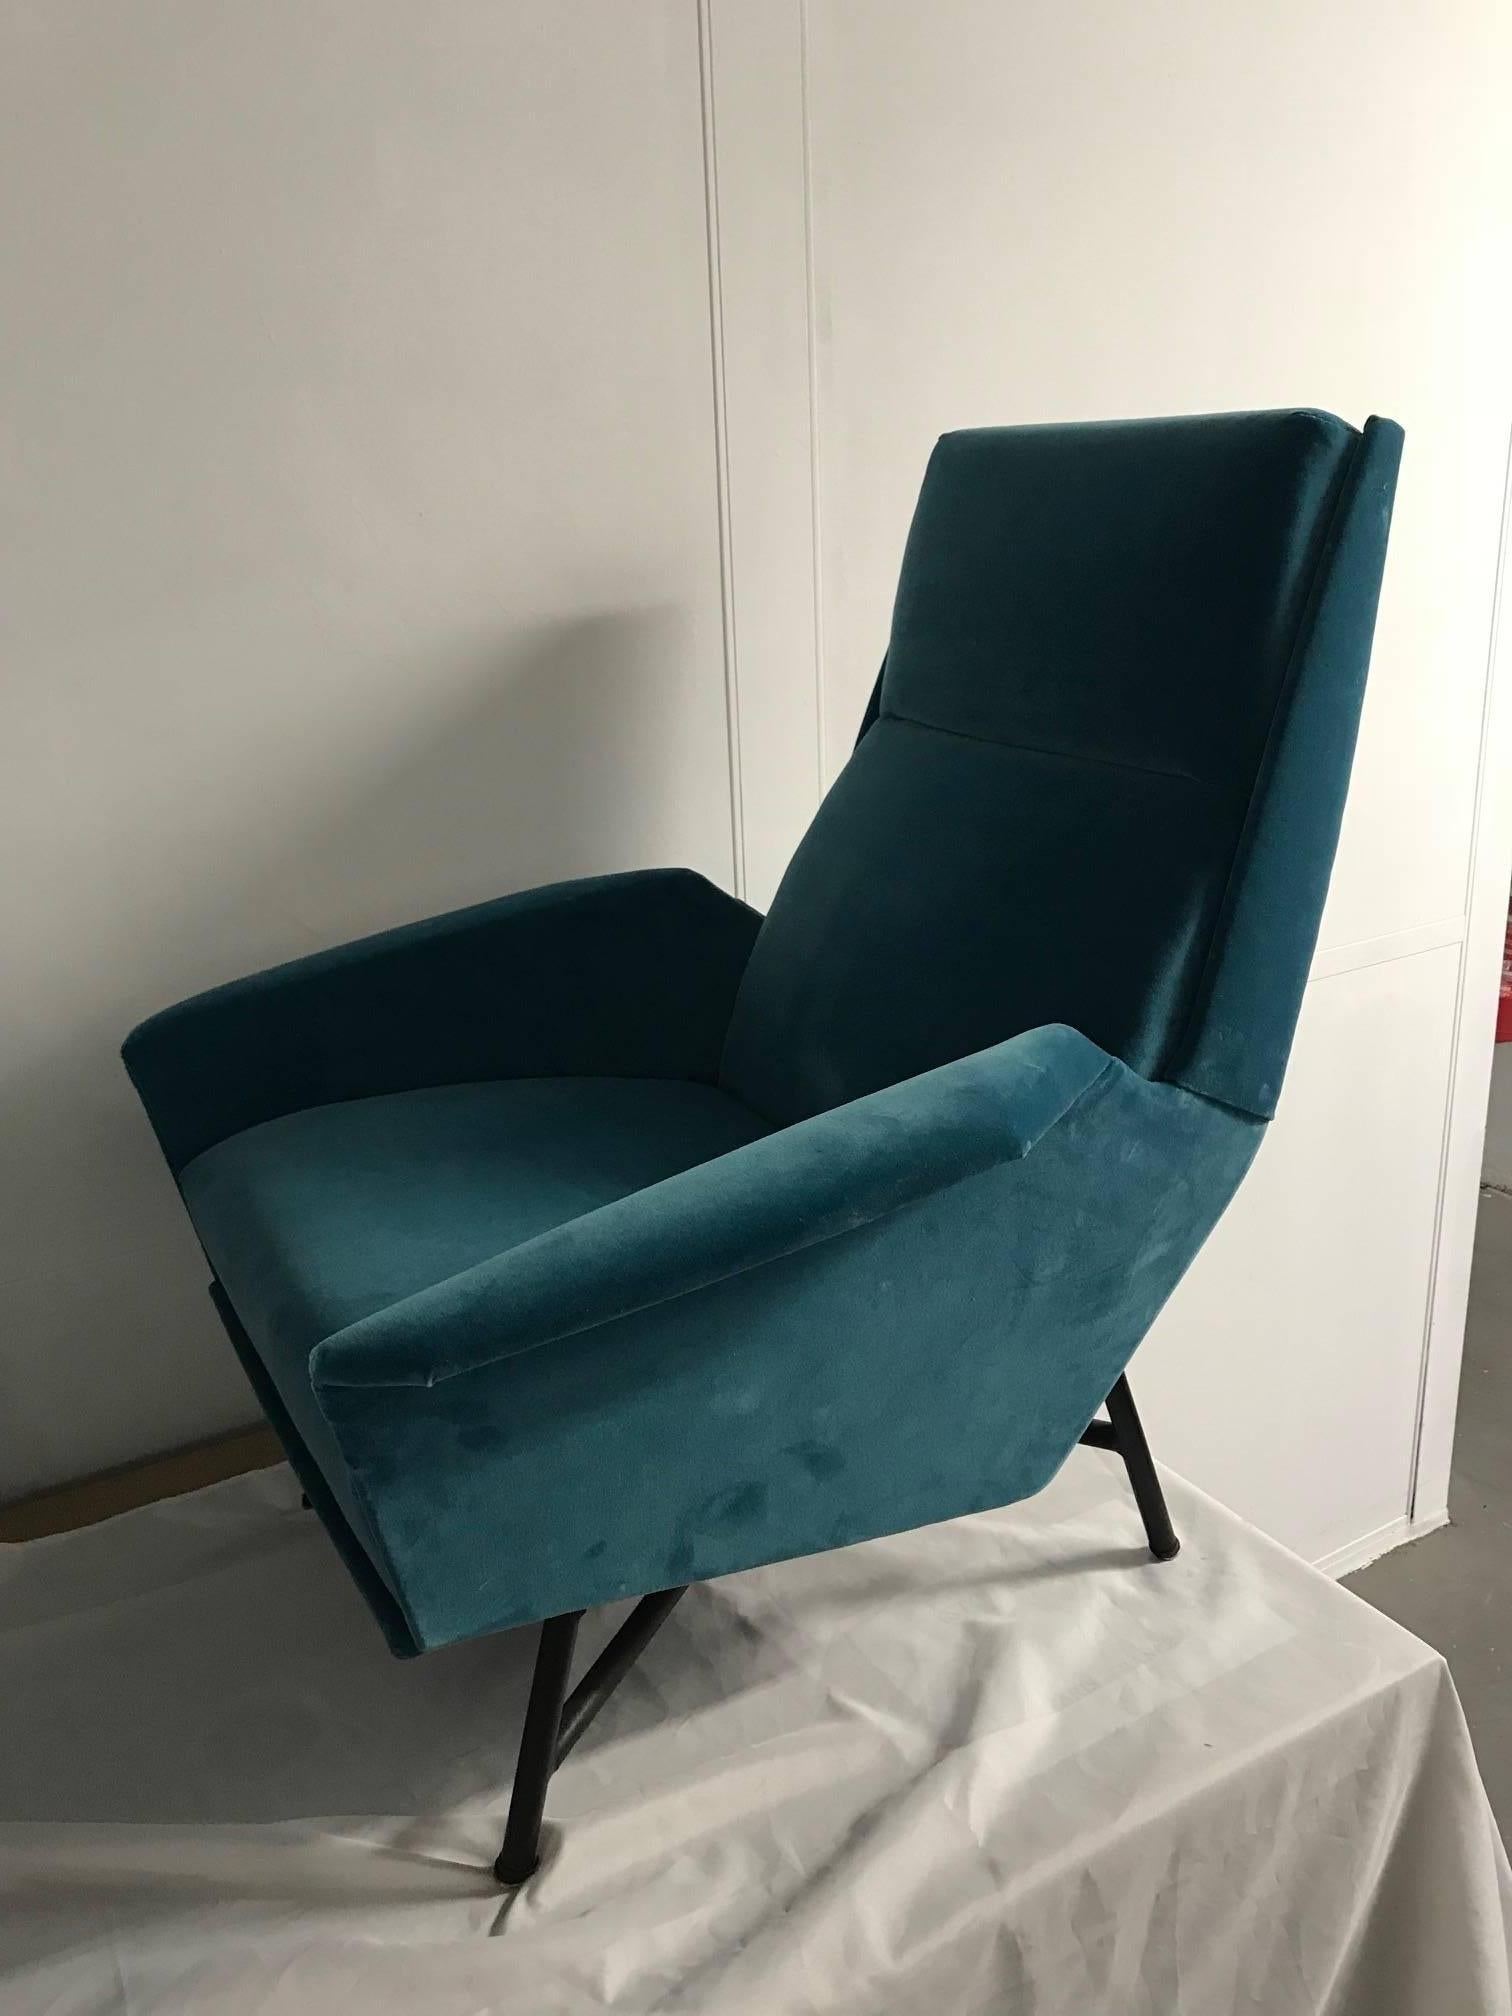 Pair of armchairs by Claude Delor, France, 1960s recently reupholstered with a blue velvet.